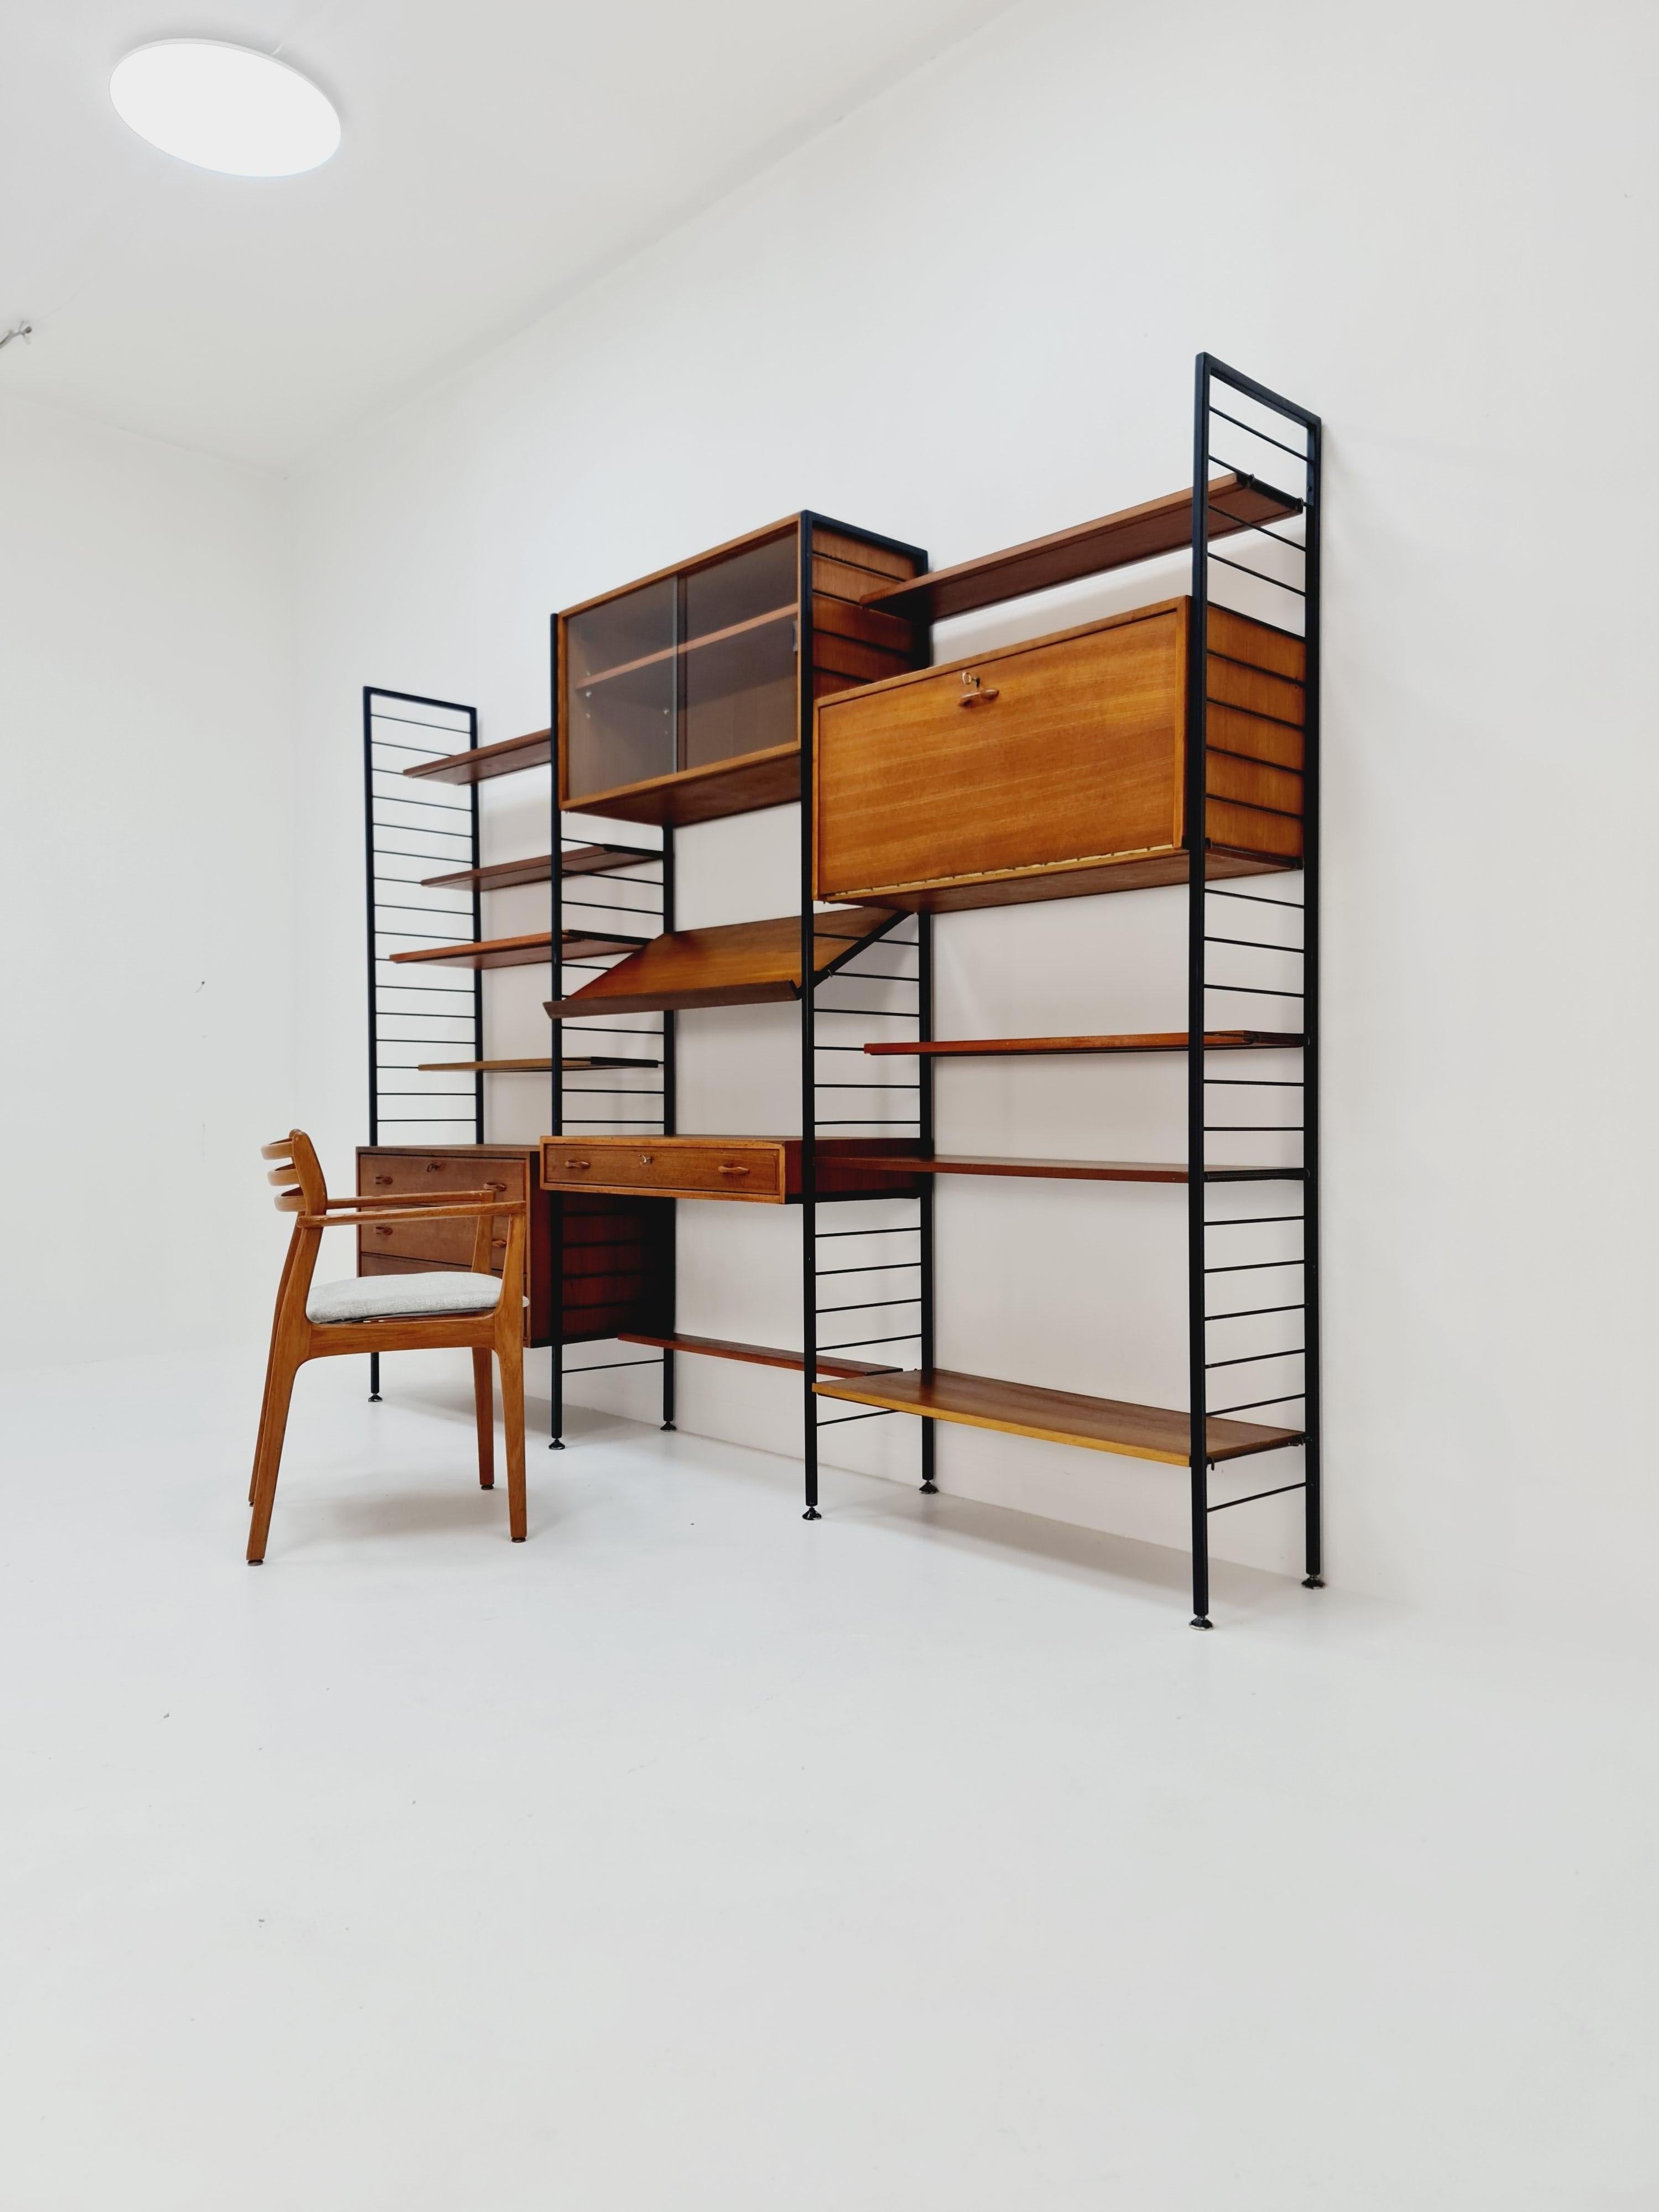 Free standing Mid century modular unit shelving system by Staples Ladderax 6